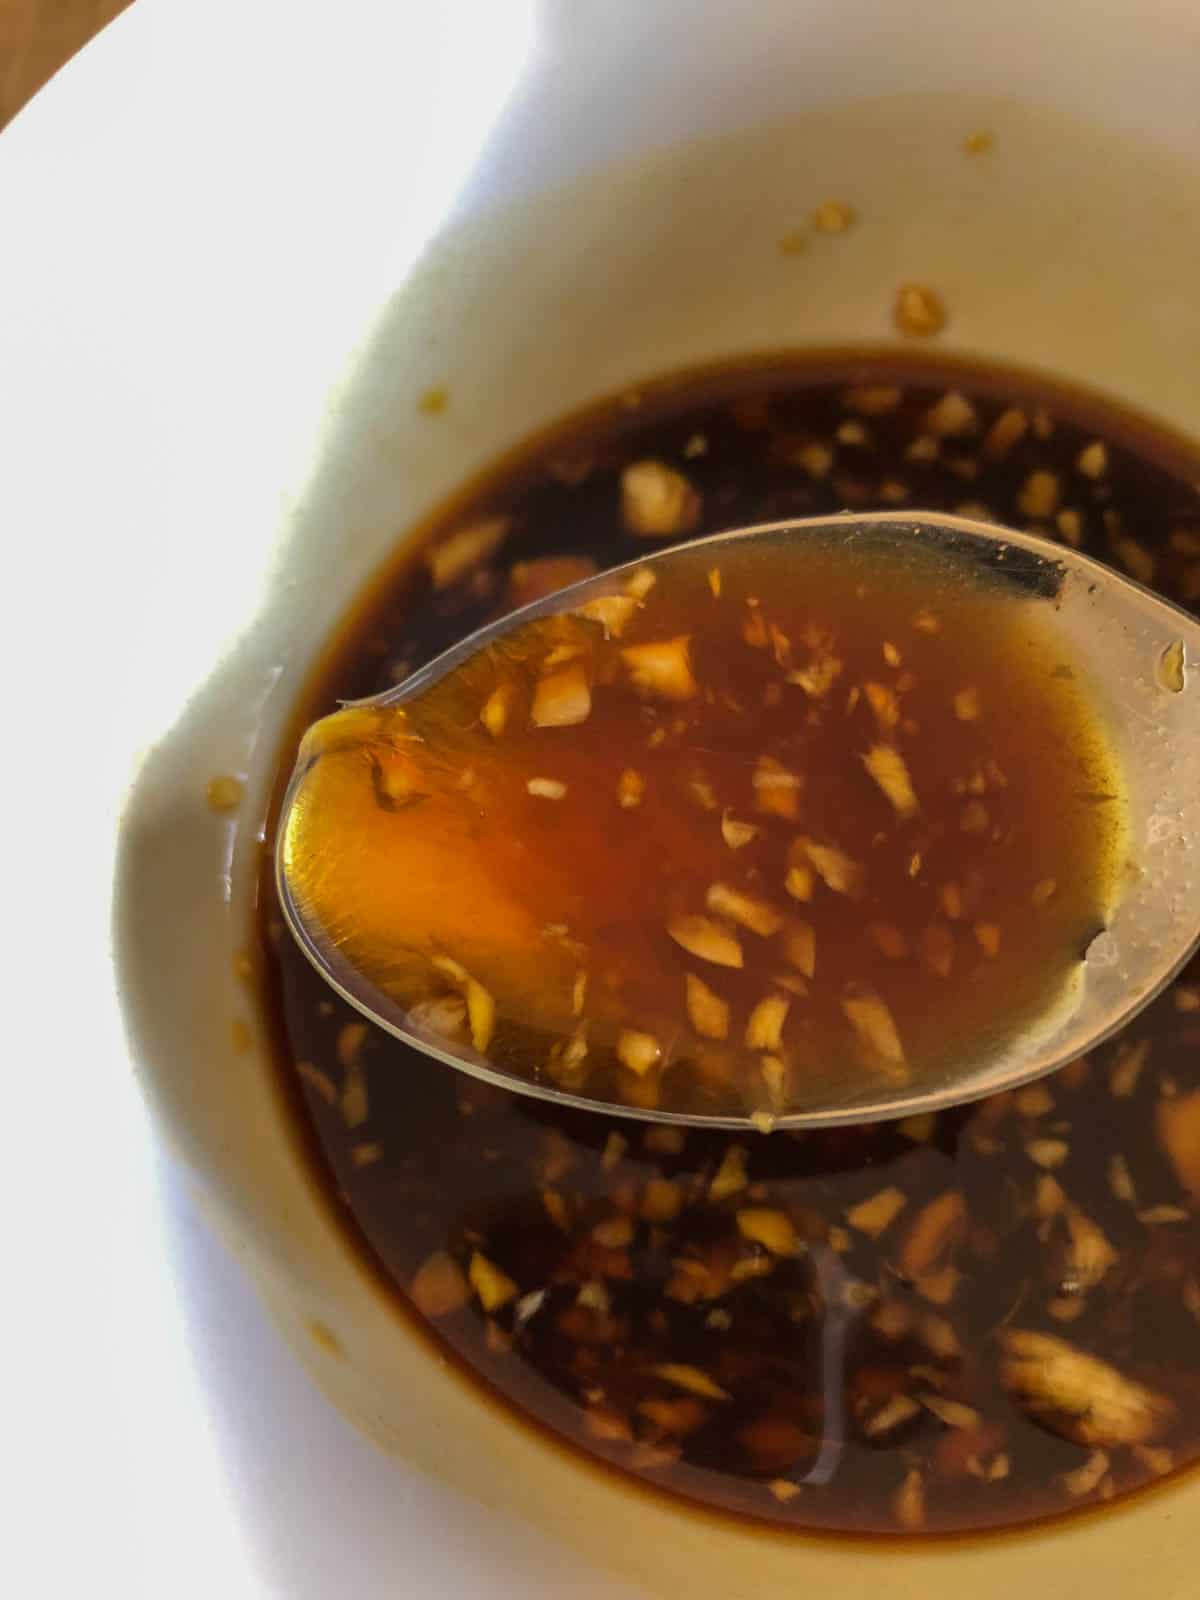 A soy sauce based sauce with pieces of ginger and garlic in a white bowl with a spoon containing some of the sauce in the foreground.